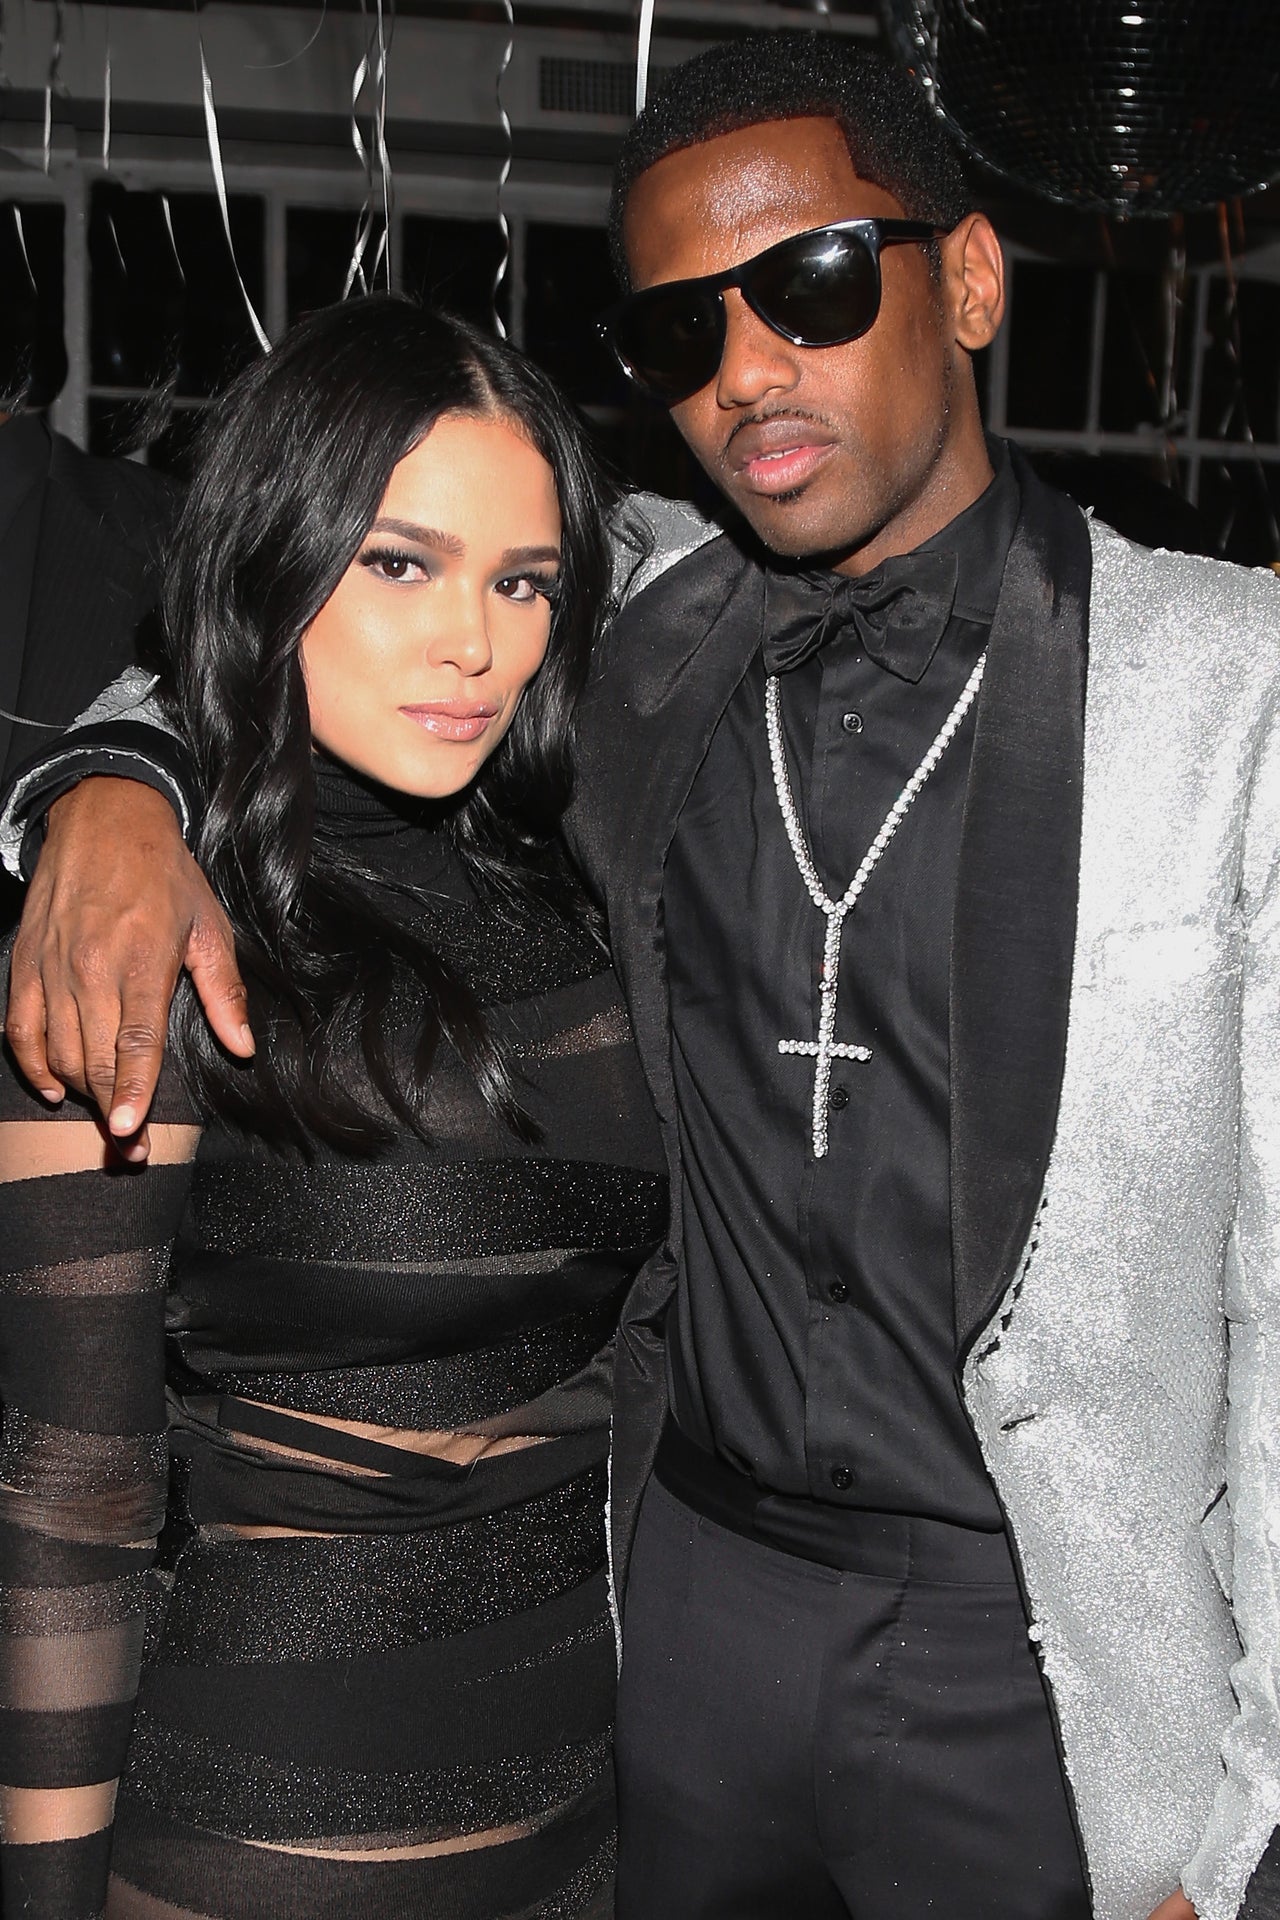 Fabolous Caught on Video Threatening Emily B. In Domestic ...